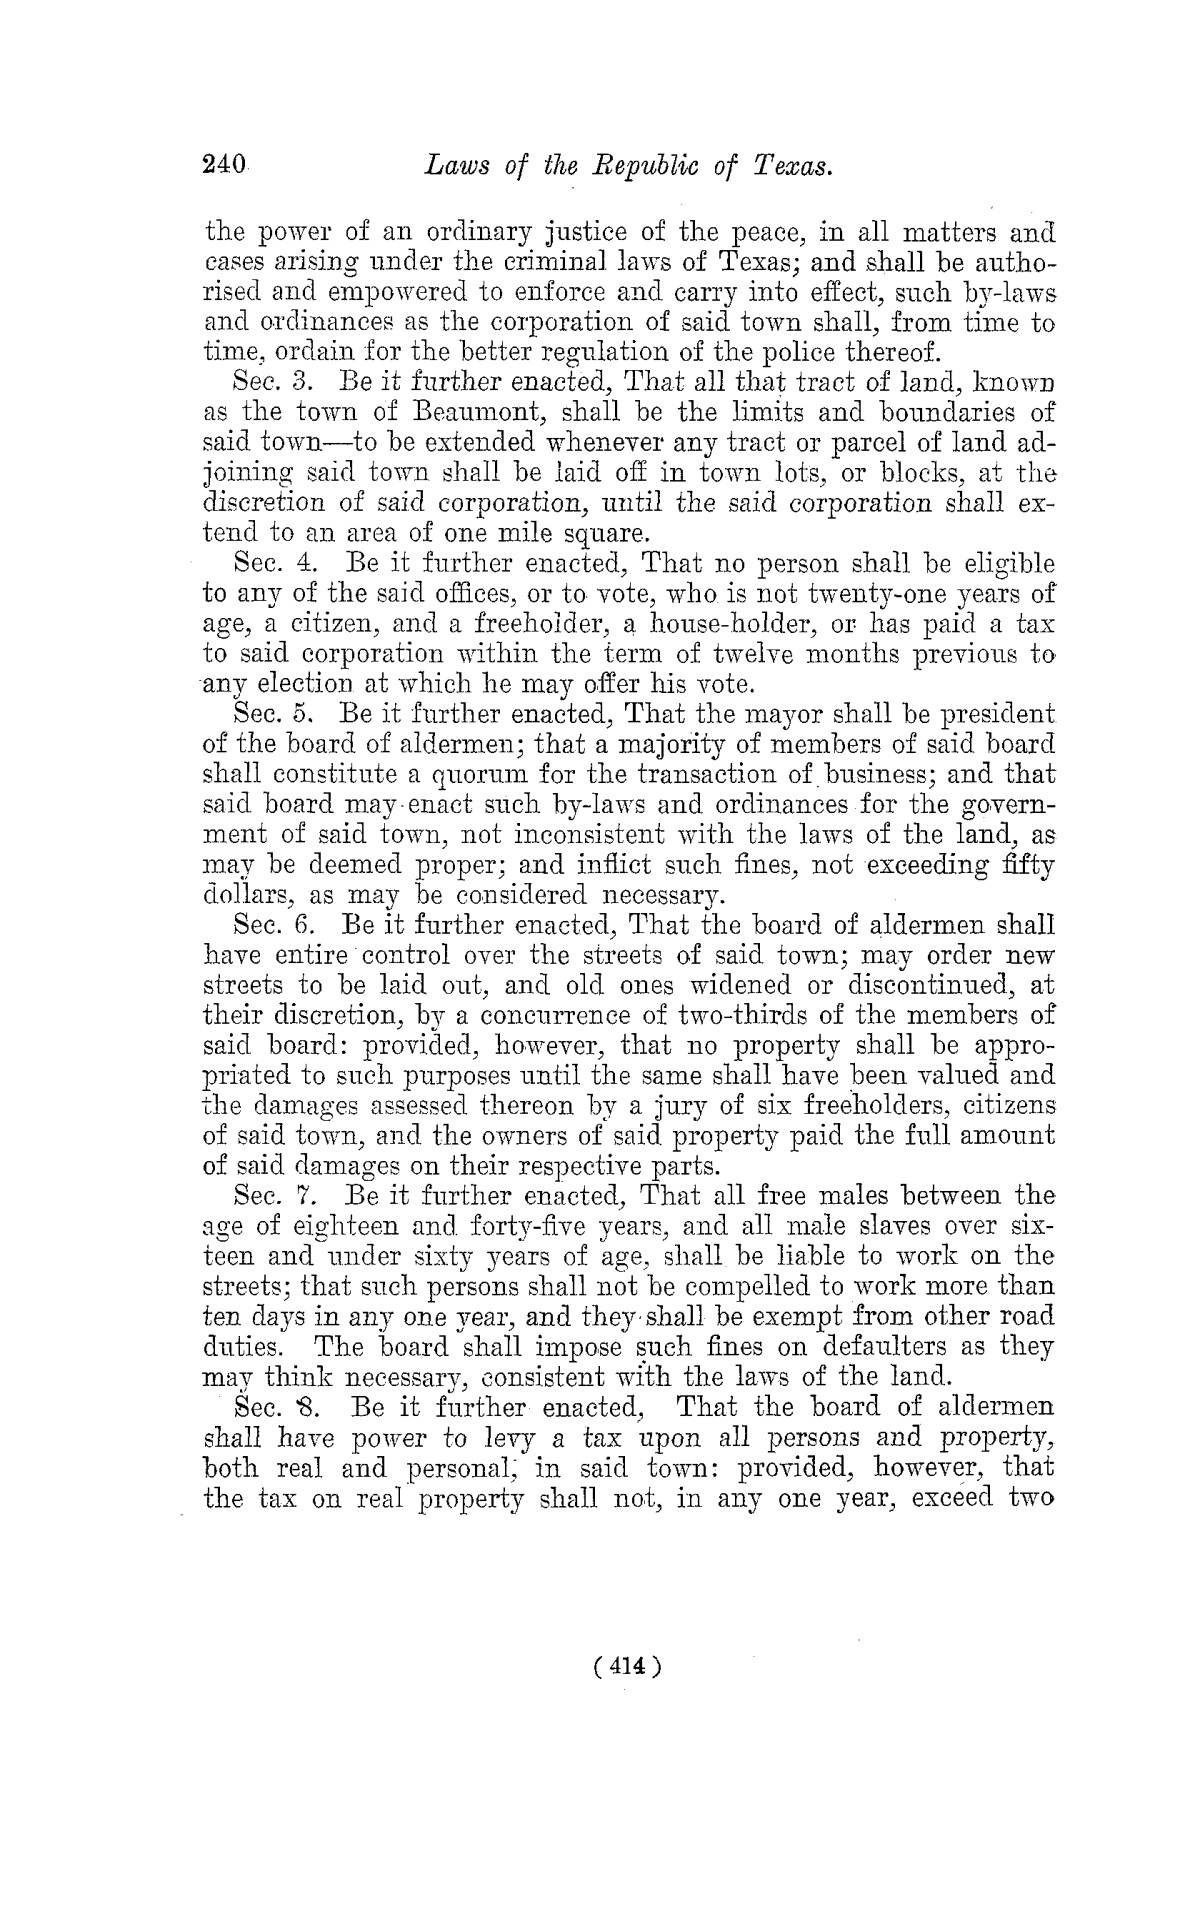 The Laws of Texas, 1822-1897 Volume 2
                                                
                                                    414
                                                